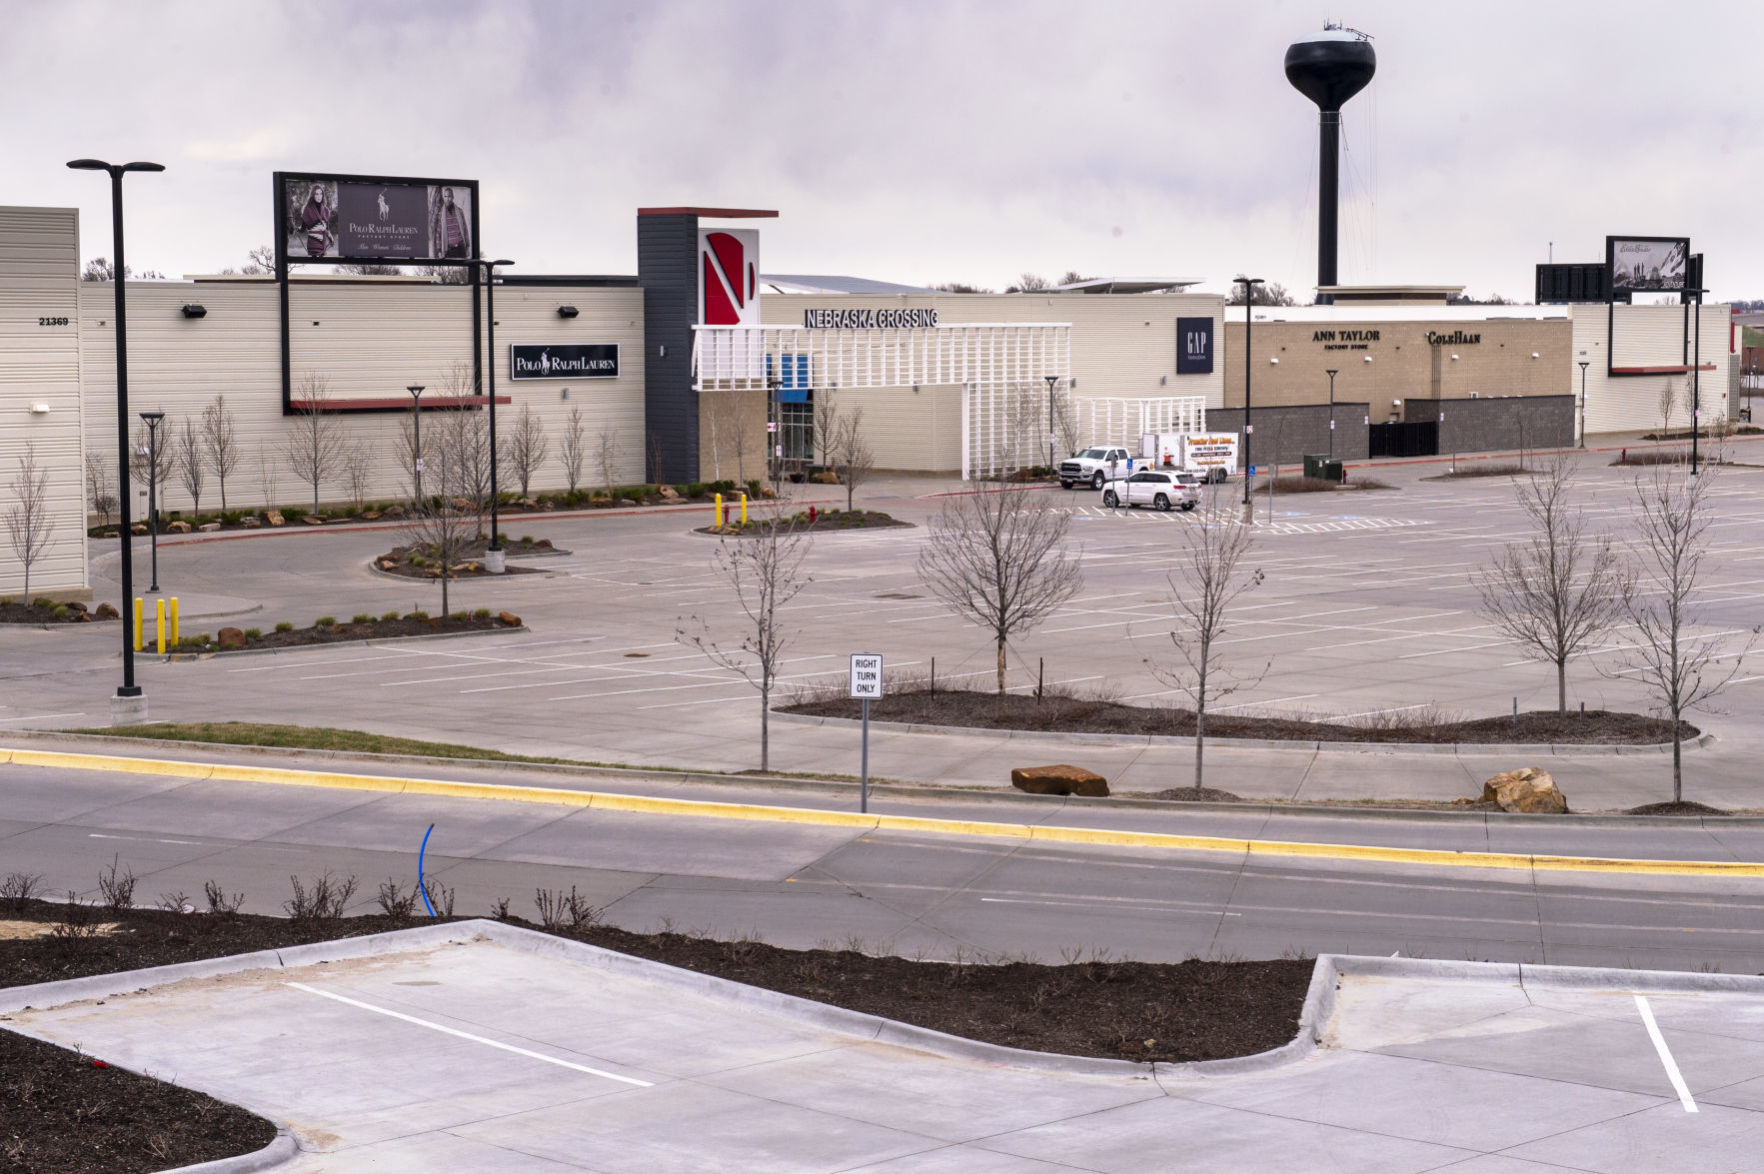 Gretna outlet mall will not be open to 